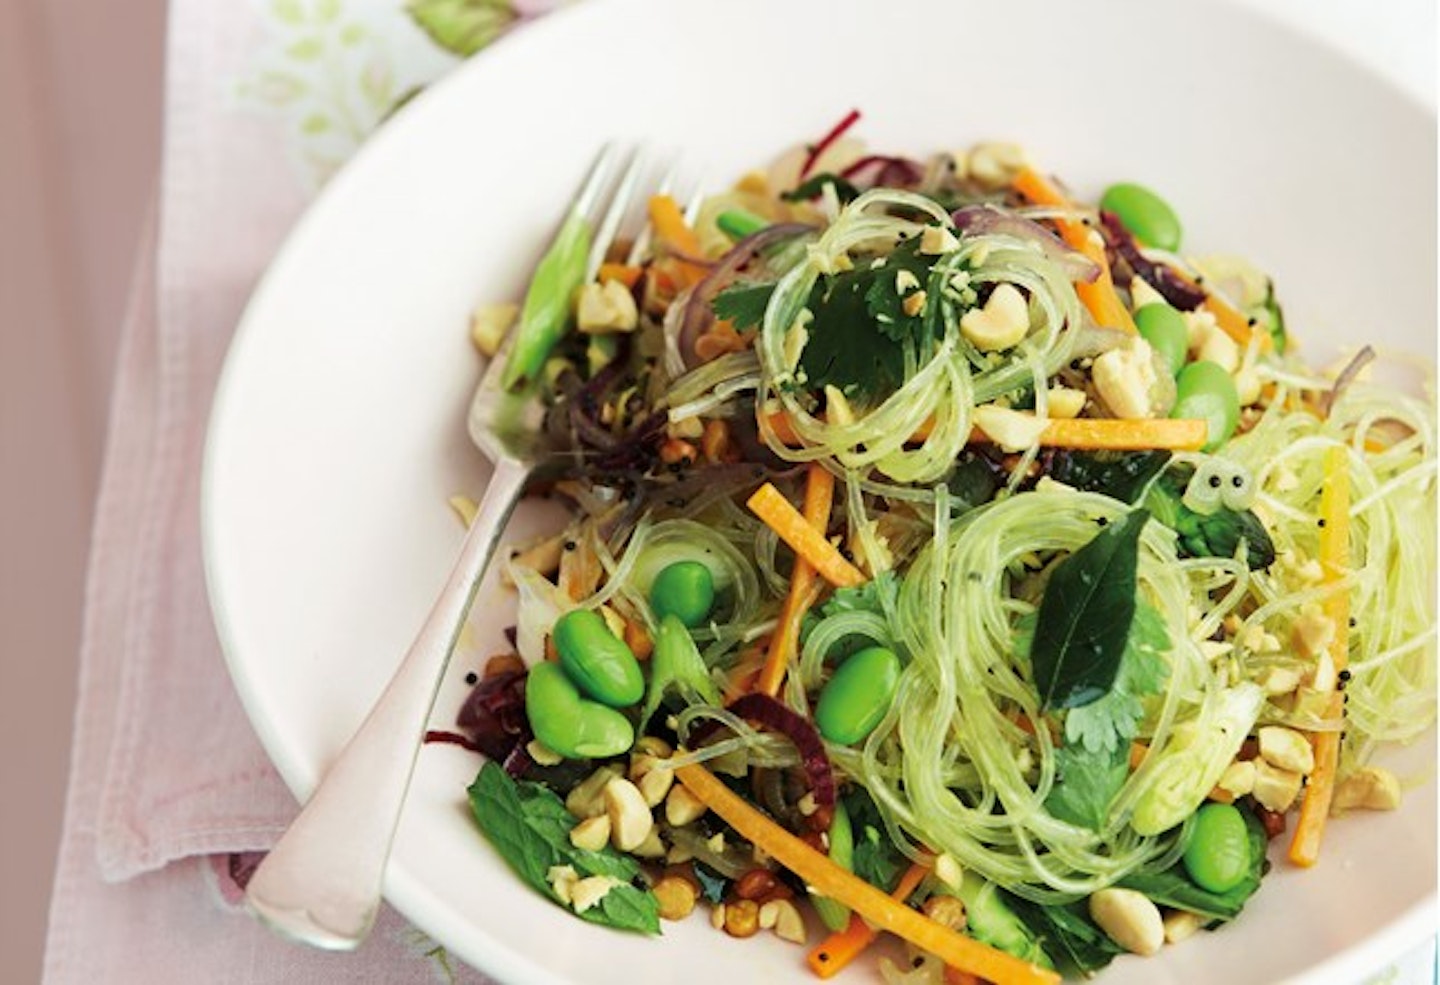 Indian stir-fried spring veg vermicelli with peanuts